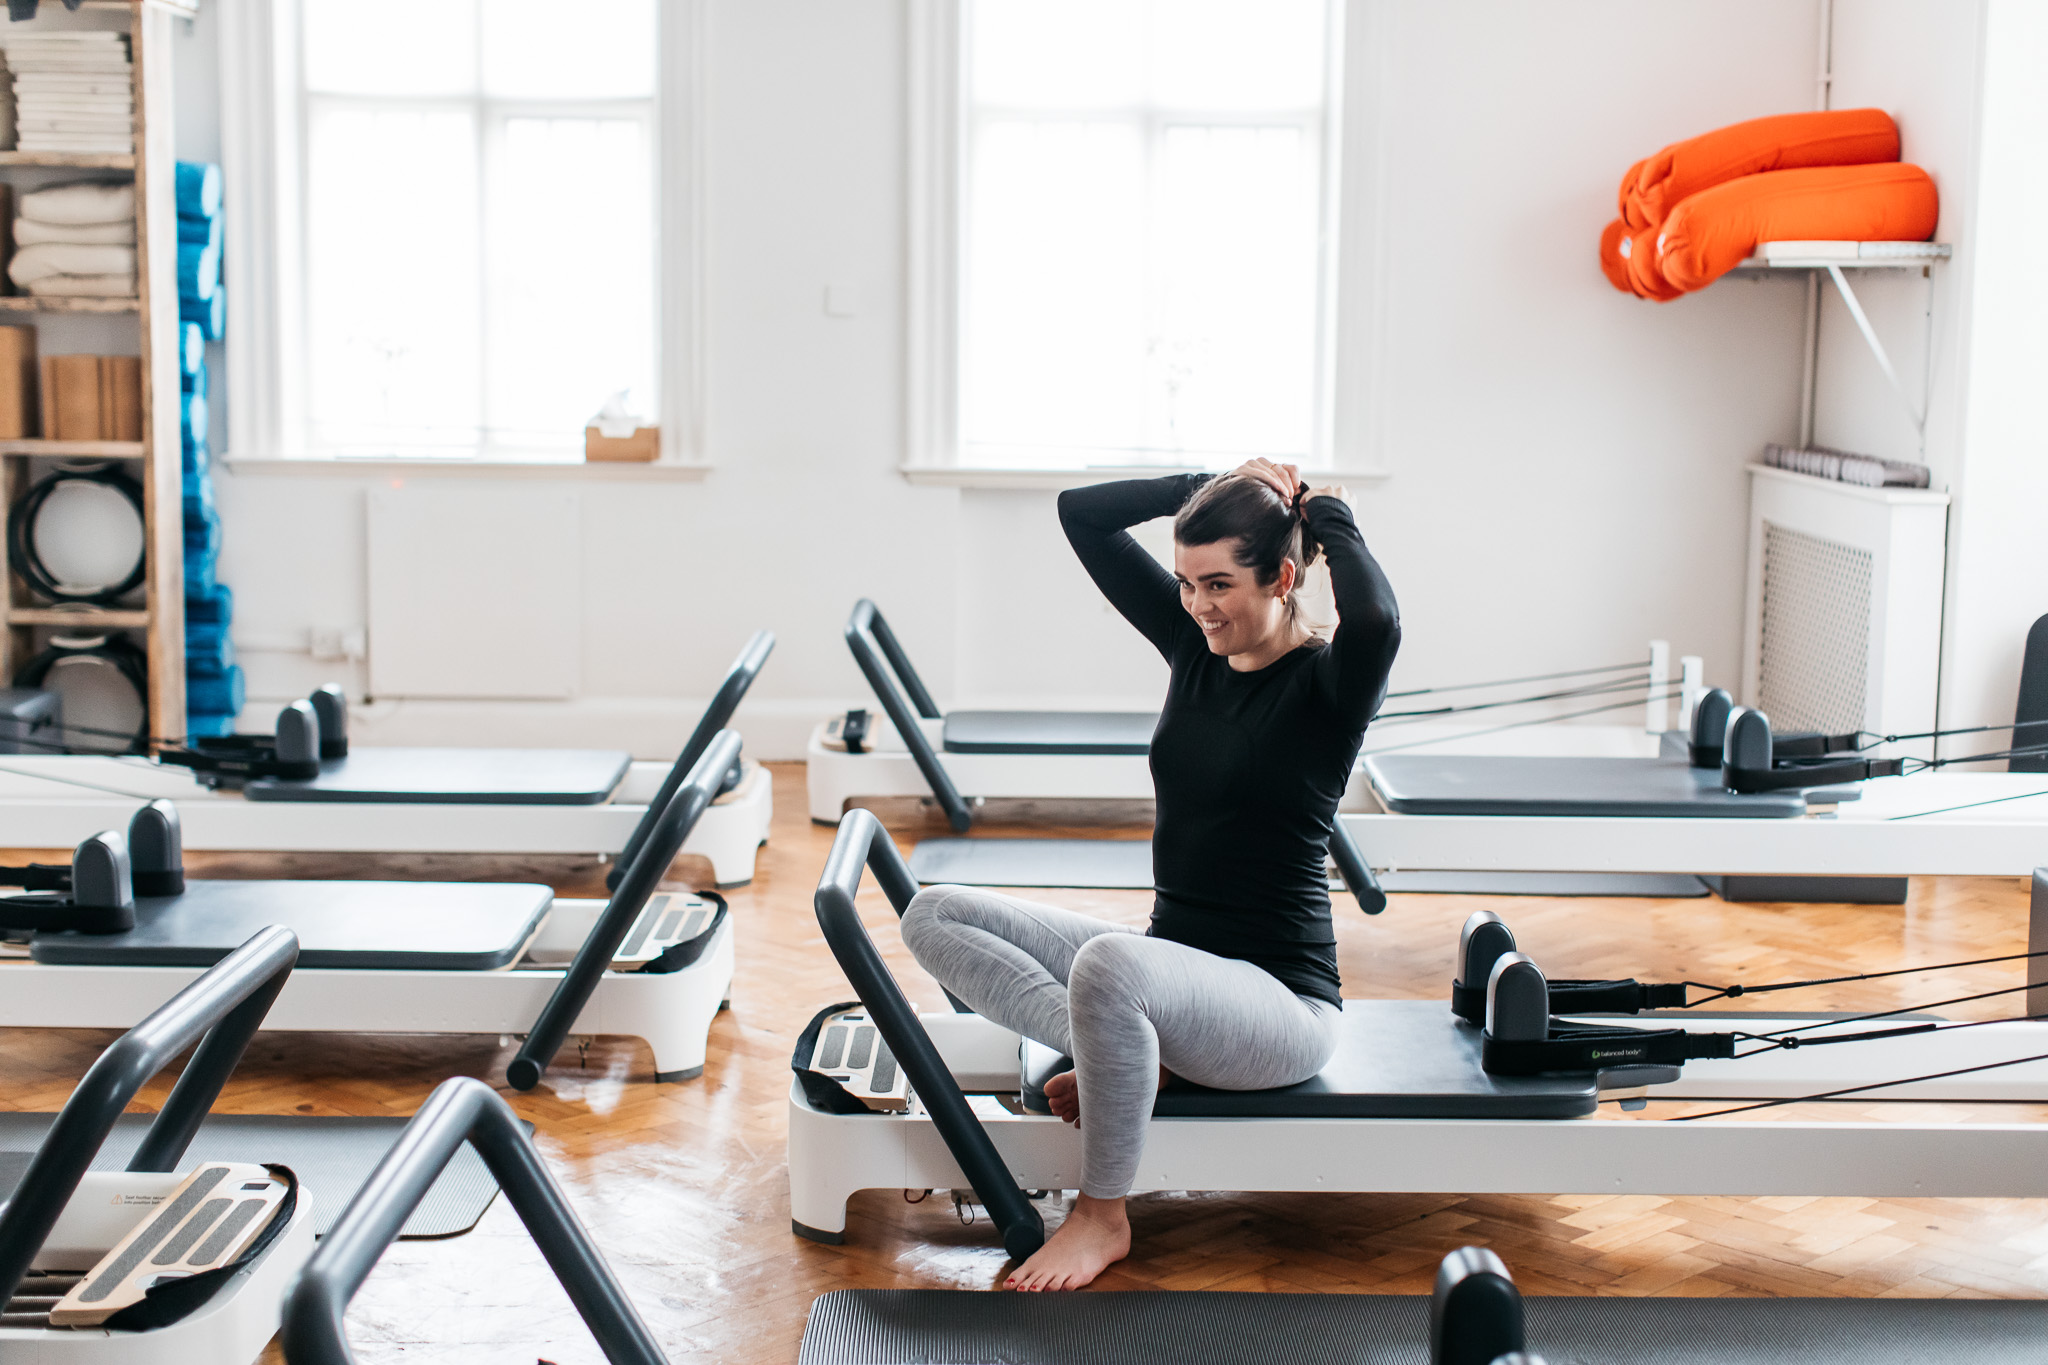 What happened when I did reformer pilates for 3 weeks' - reformer pilates  body transformation